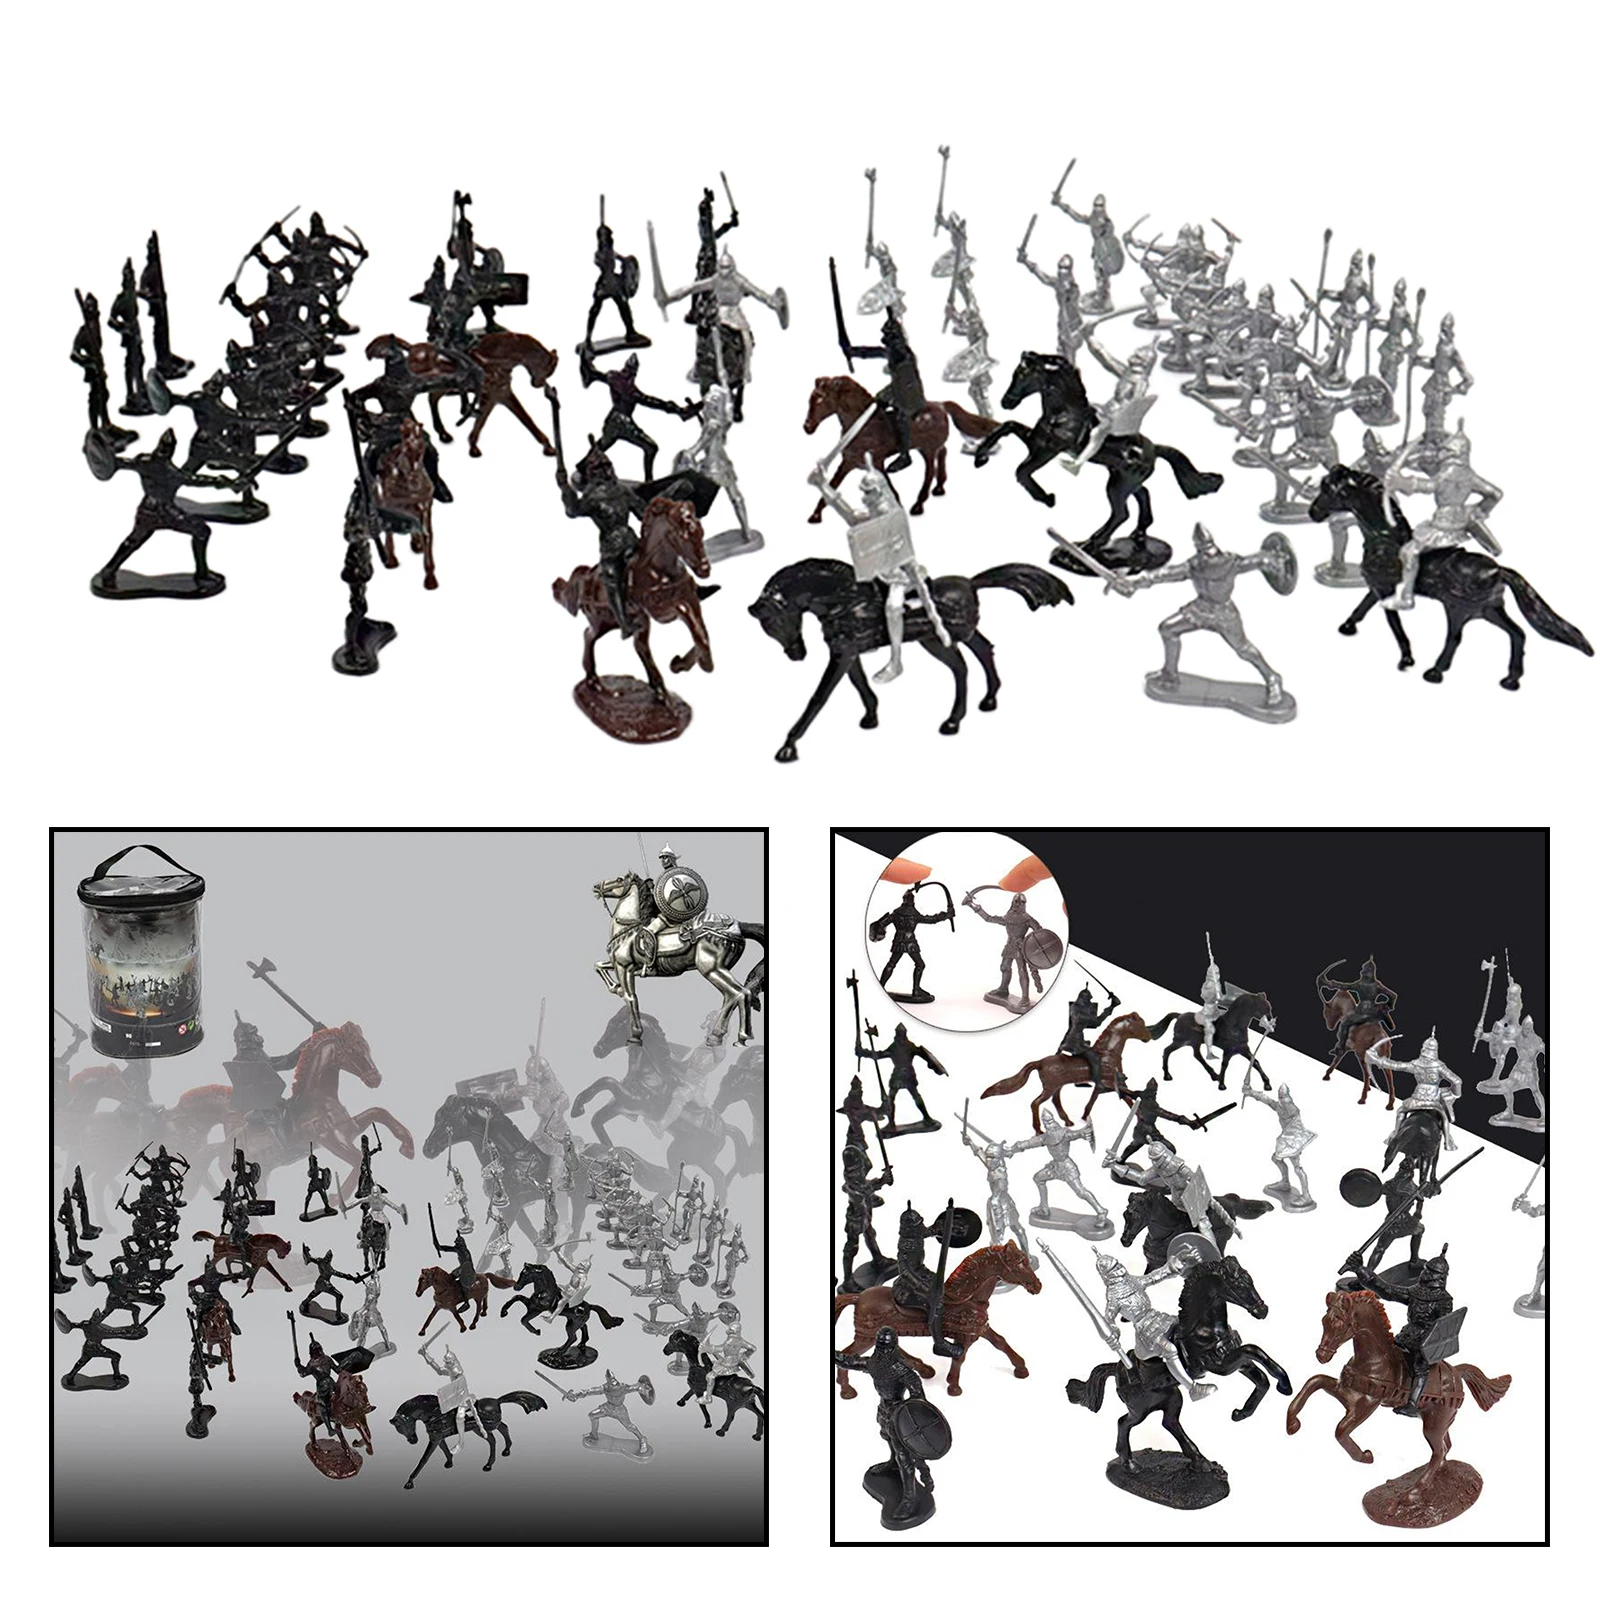 Medieval Knights Warriors Soldiers Model Toy Army Men Figures Accessories Kit Army Toys for Boys Children Kids